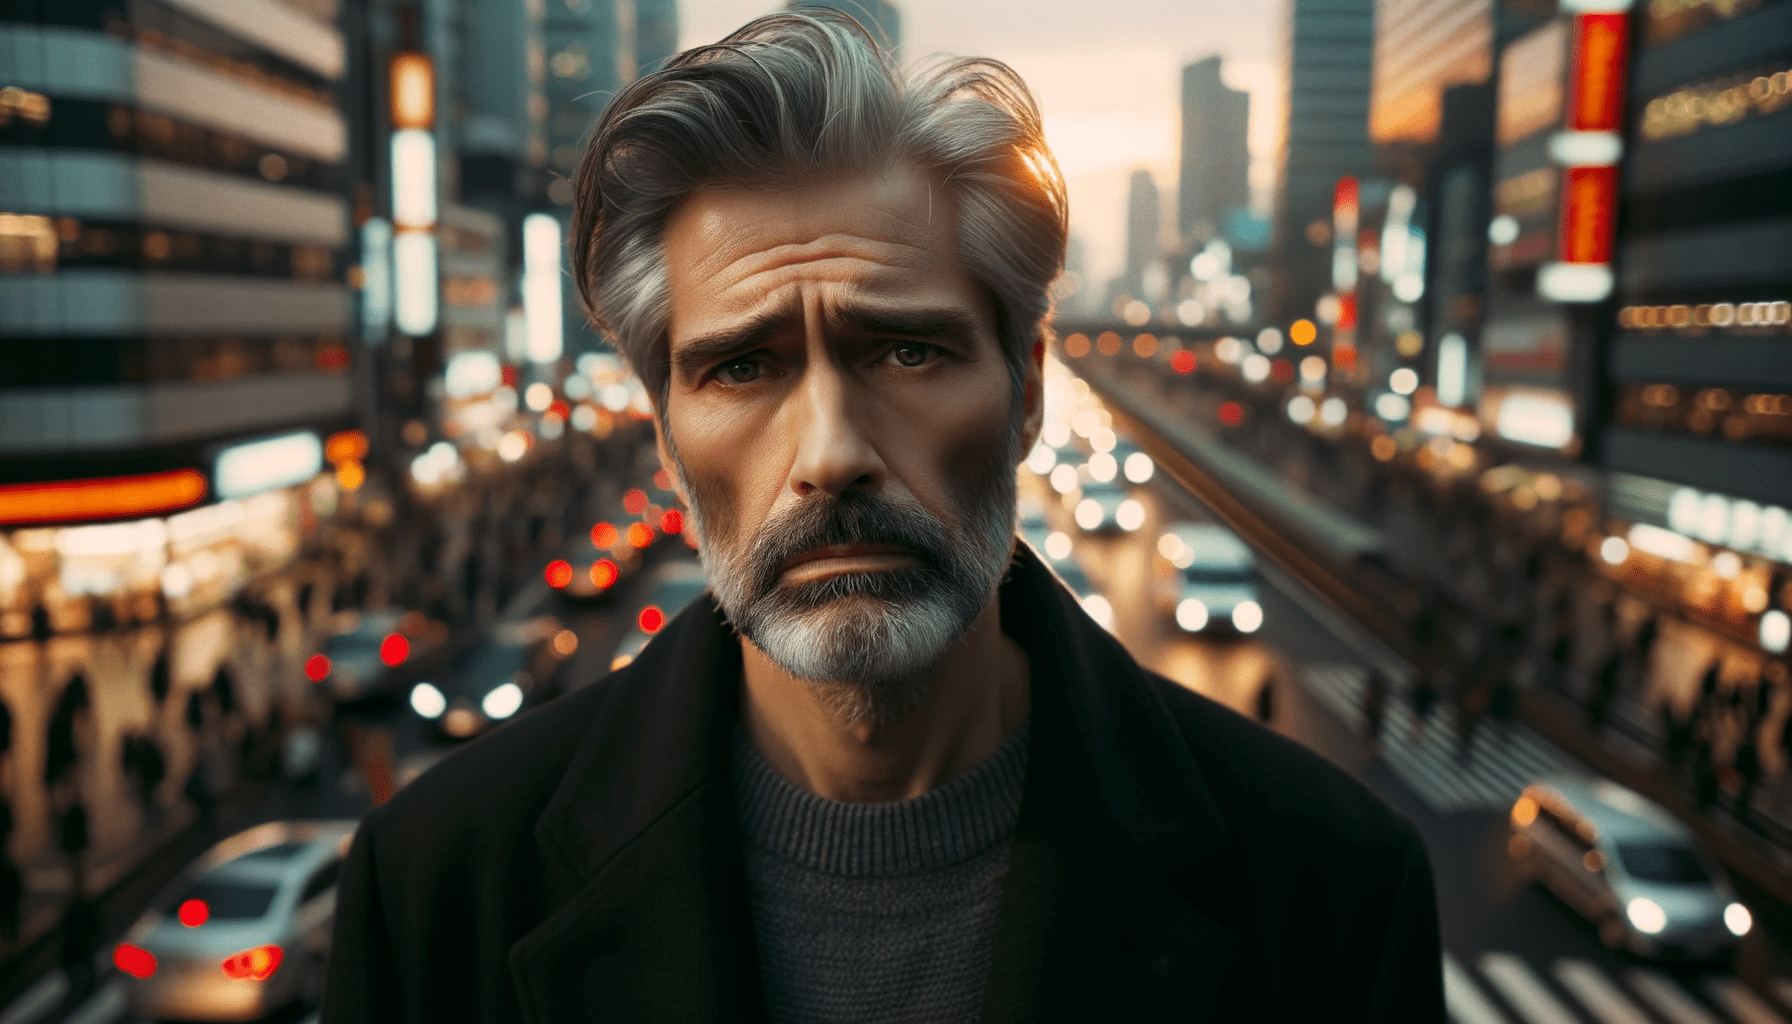 Caucasian male with greying hair stands in a bustling cityscape during sunset. The weight of lifes challenge